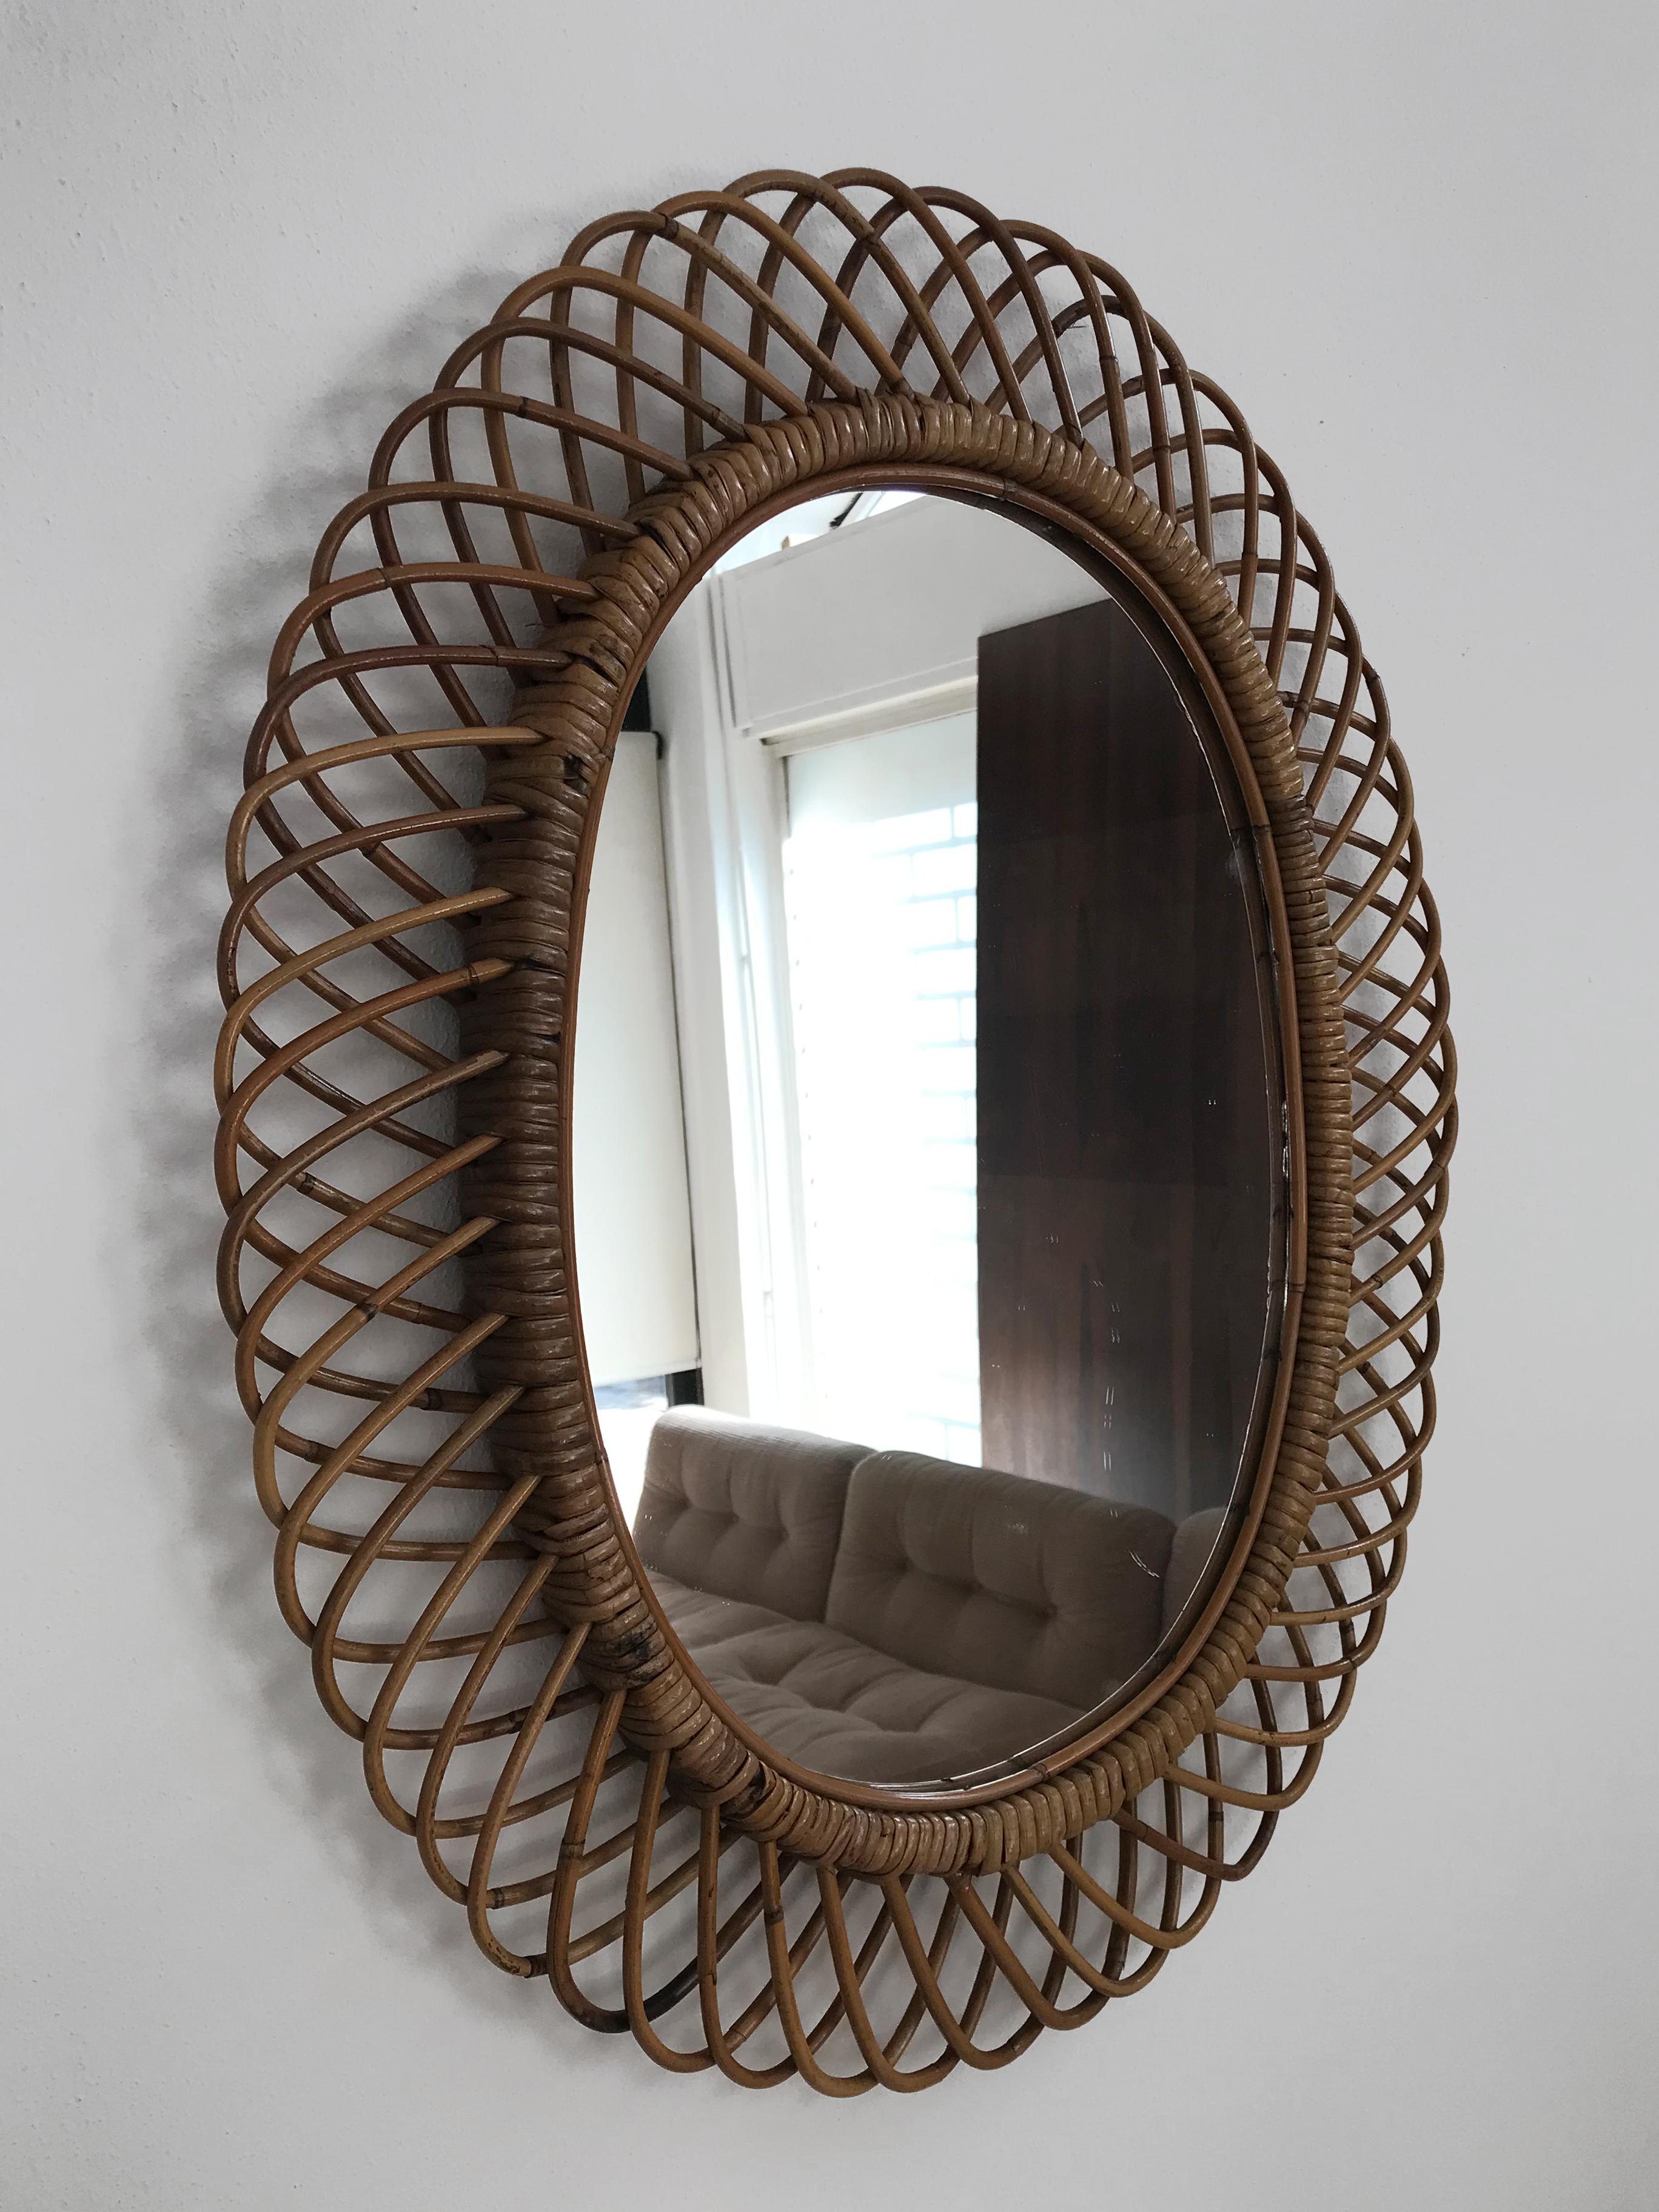 Italian Mid-Century Modern design oval wall mirror with bamboo woven rattan frame, Italy 1950.

Please note that the wall moirror is original of the period and this shows normal signs of age and use.